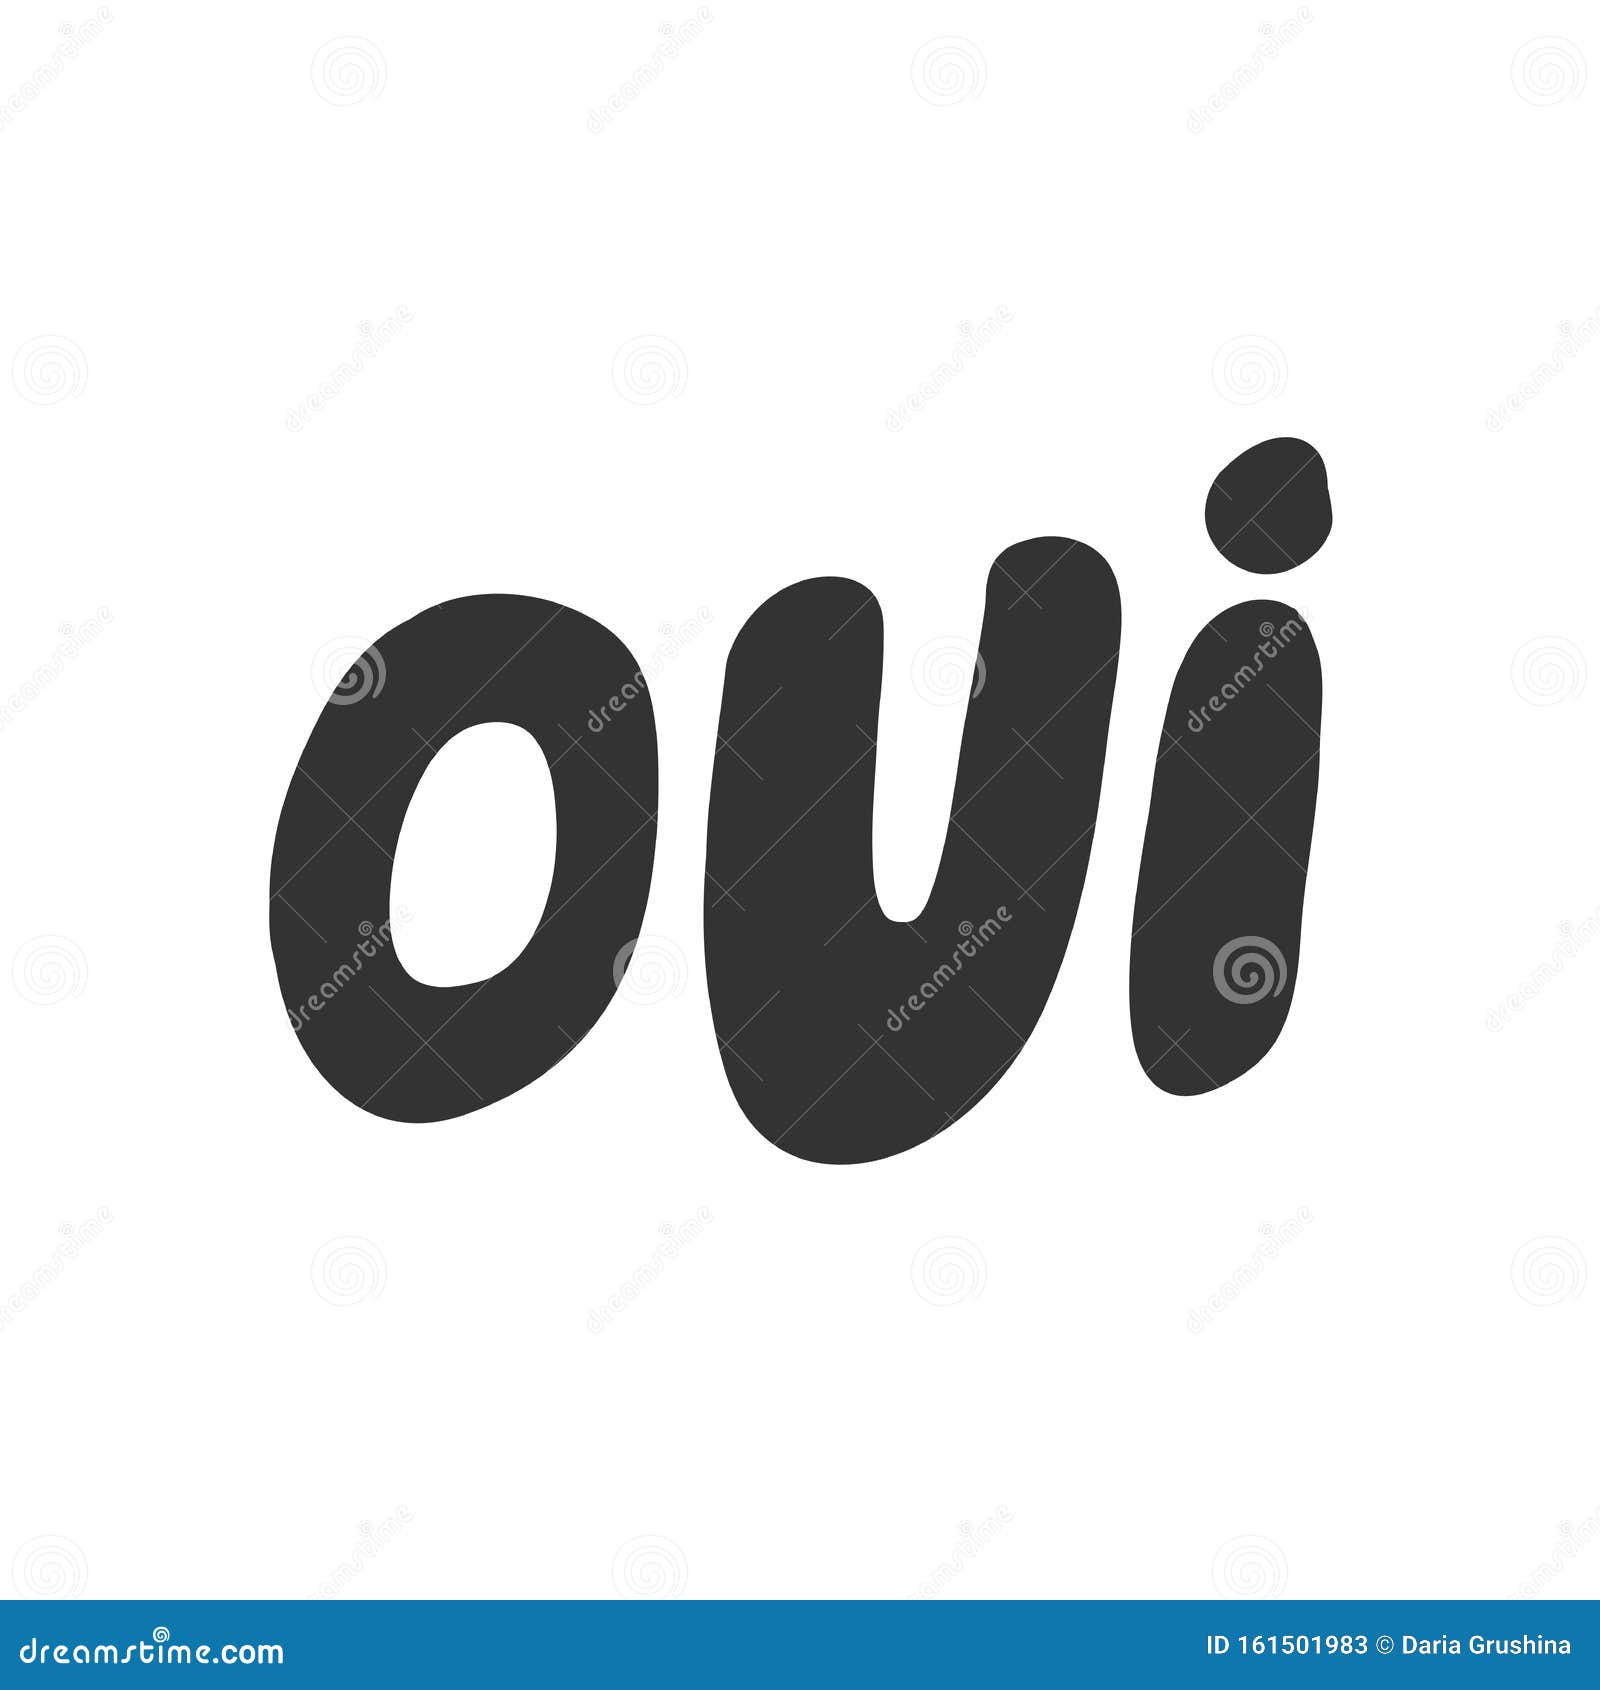 Oui French Language Mean Yes Vector Stock Vector (Royalty Free) 2351699841